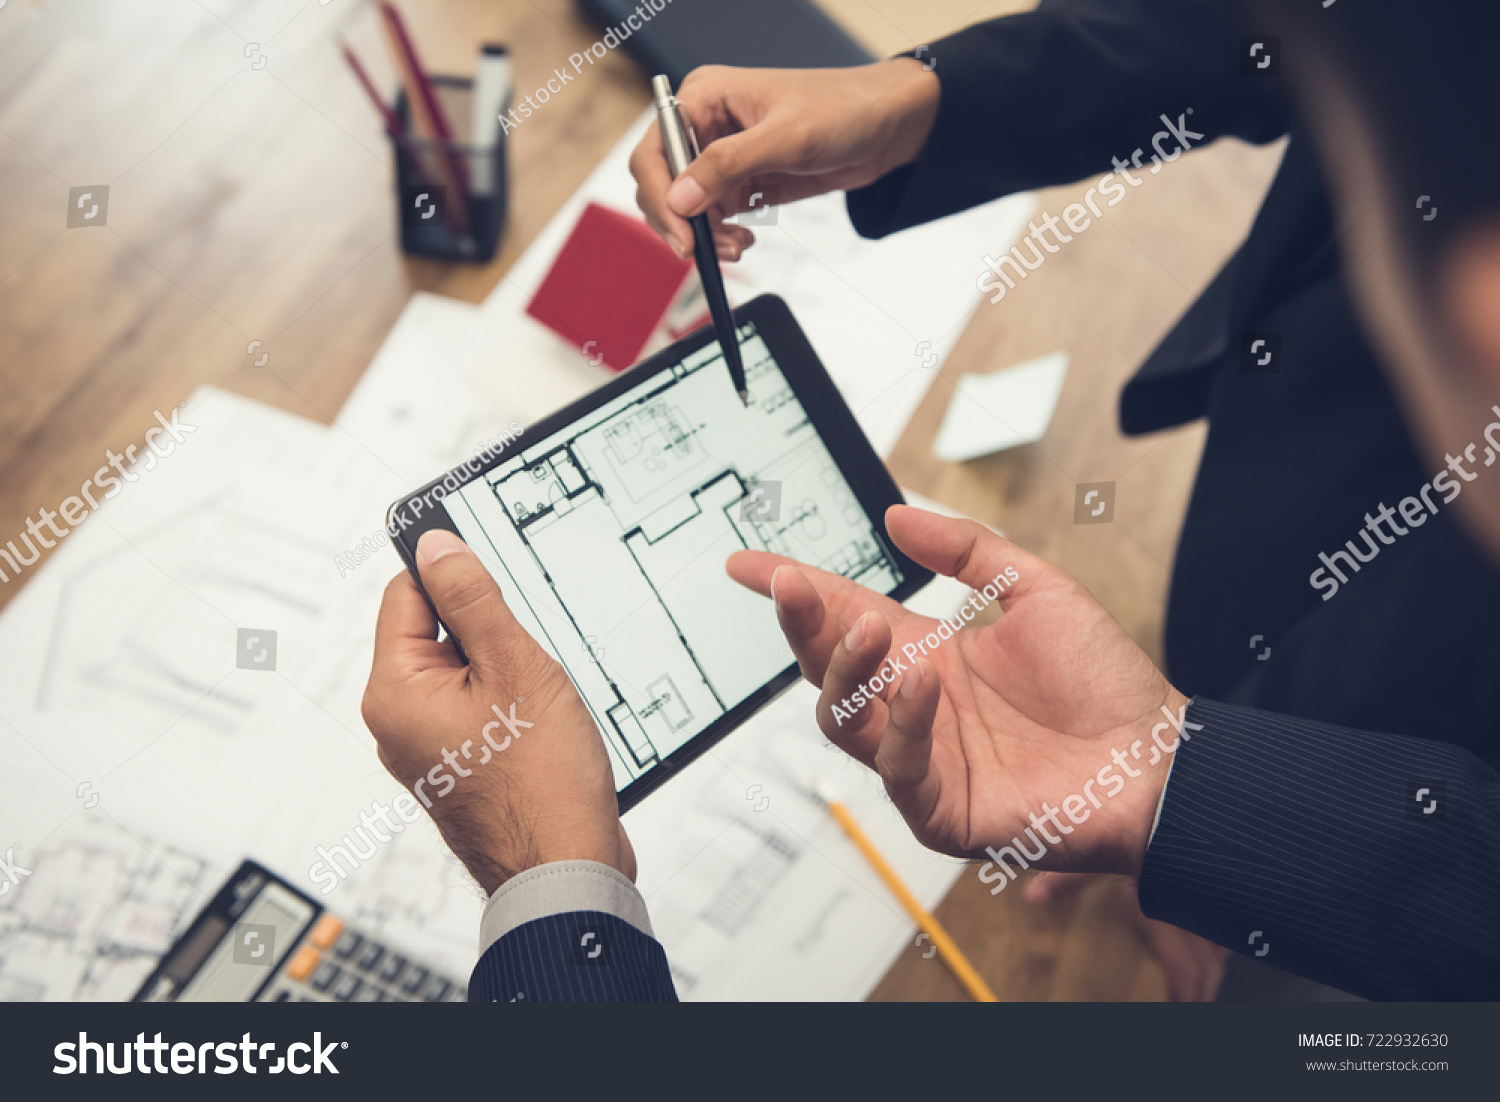 Real estate agent with client or architect team discussing a housing model and its blueprints digitally using a tablet computer #722932630